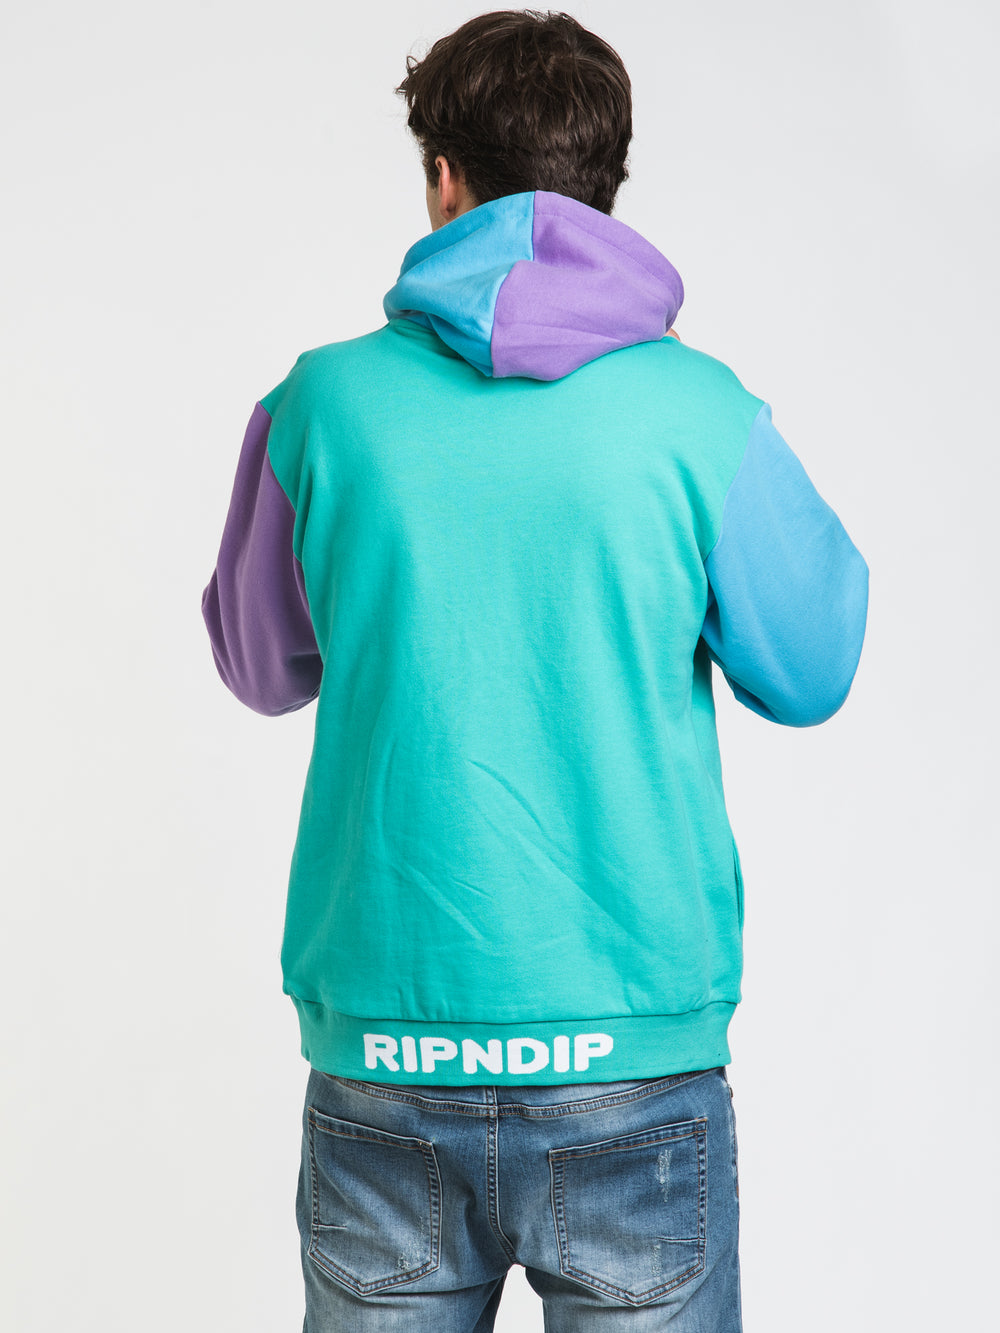 PULL-OVER À CAPUCHE RIP N DIP BUDDY SYSTEM COLOUR BLOCK - DÉSTOCKAGE